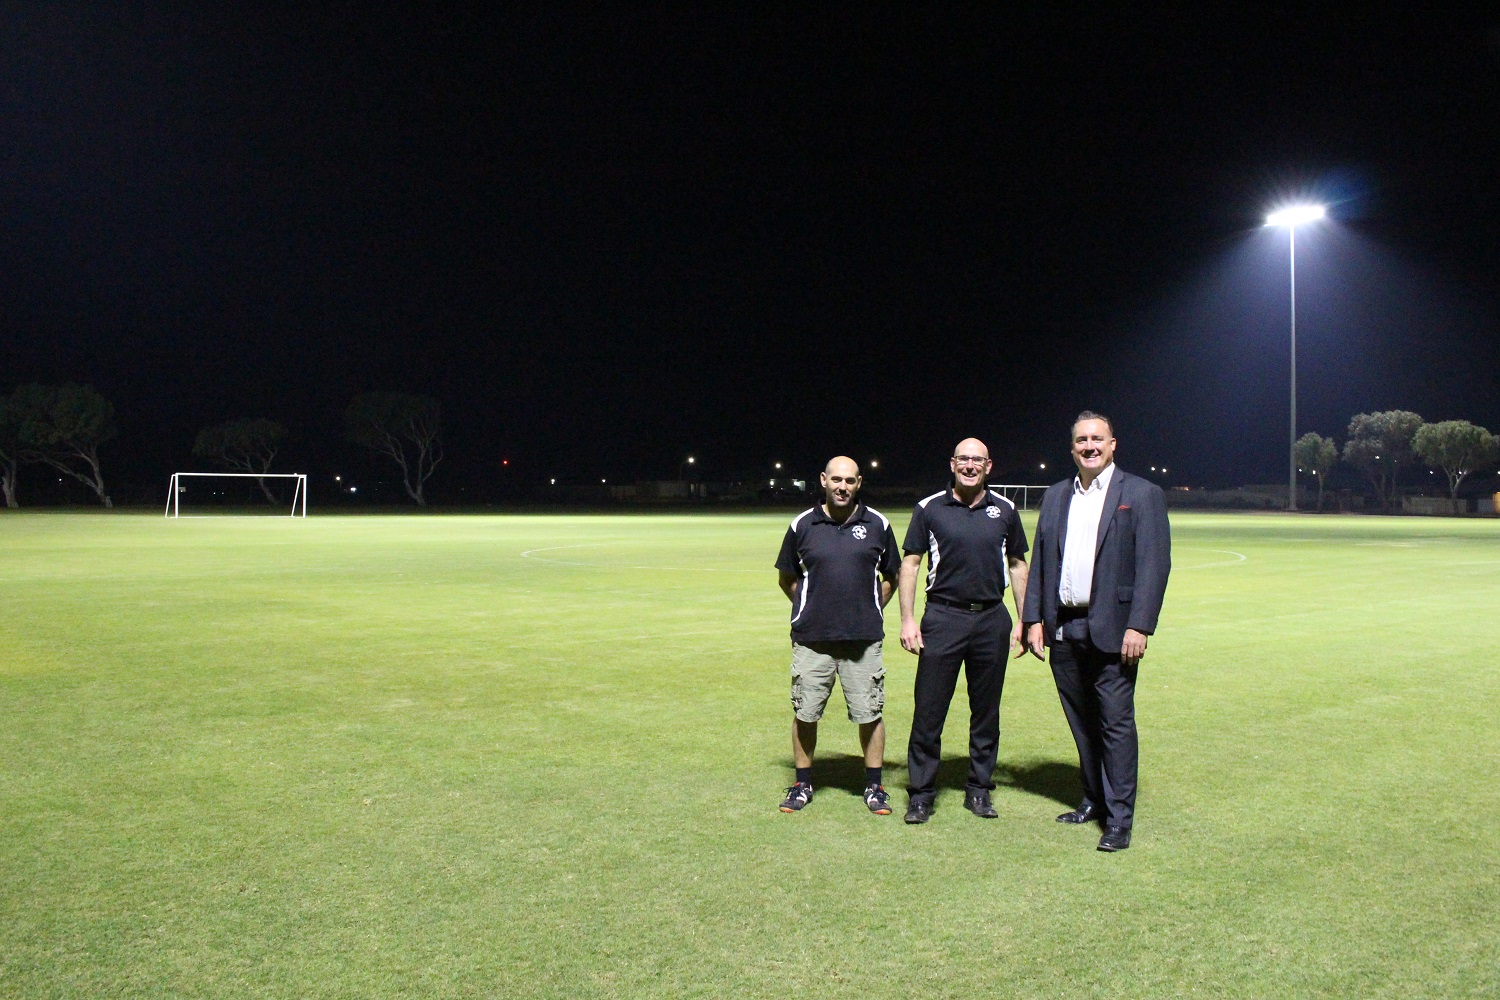 City of Greater Geraldton Mayor Shane Van Styn (from right) is joined by Geraldton Rovers Soccer Club President Dennis Morgan and Club Treasurer Francis Noguera at Alexander Park. 